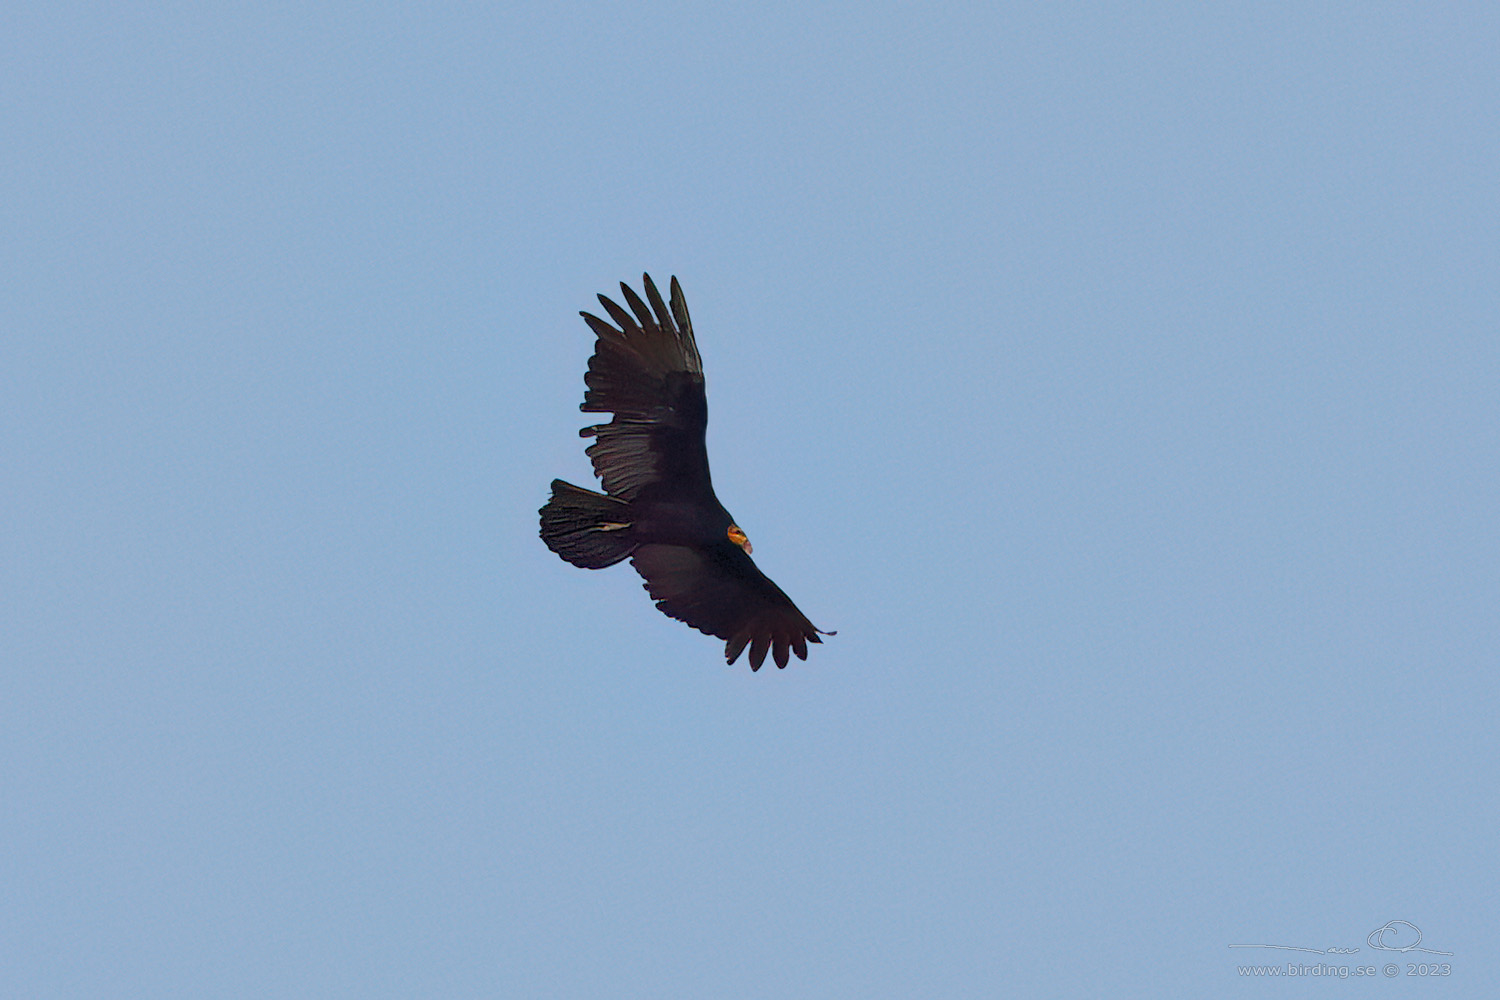 GREATER YELLOW-HEADED VULTURE (Cathartes melambrotus) - Stäng / close